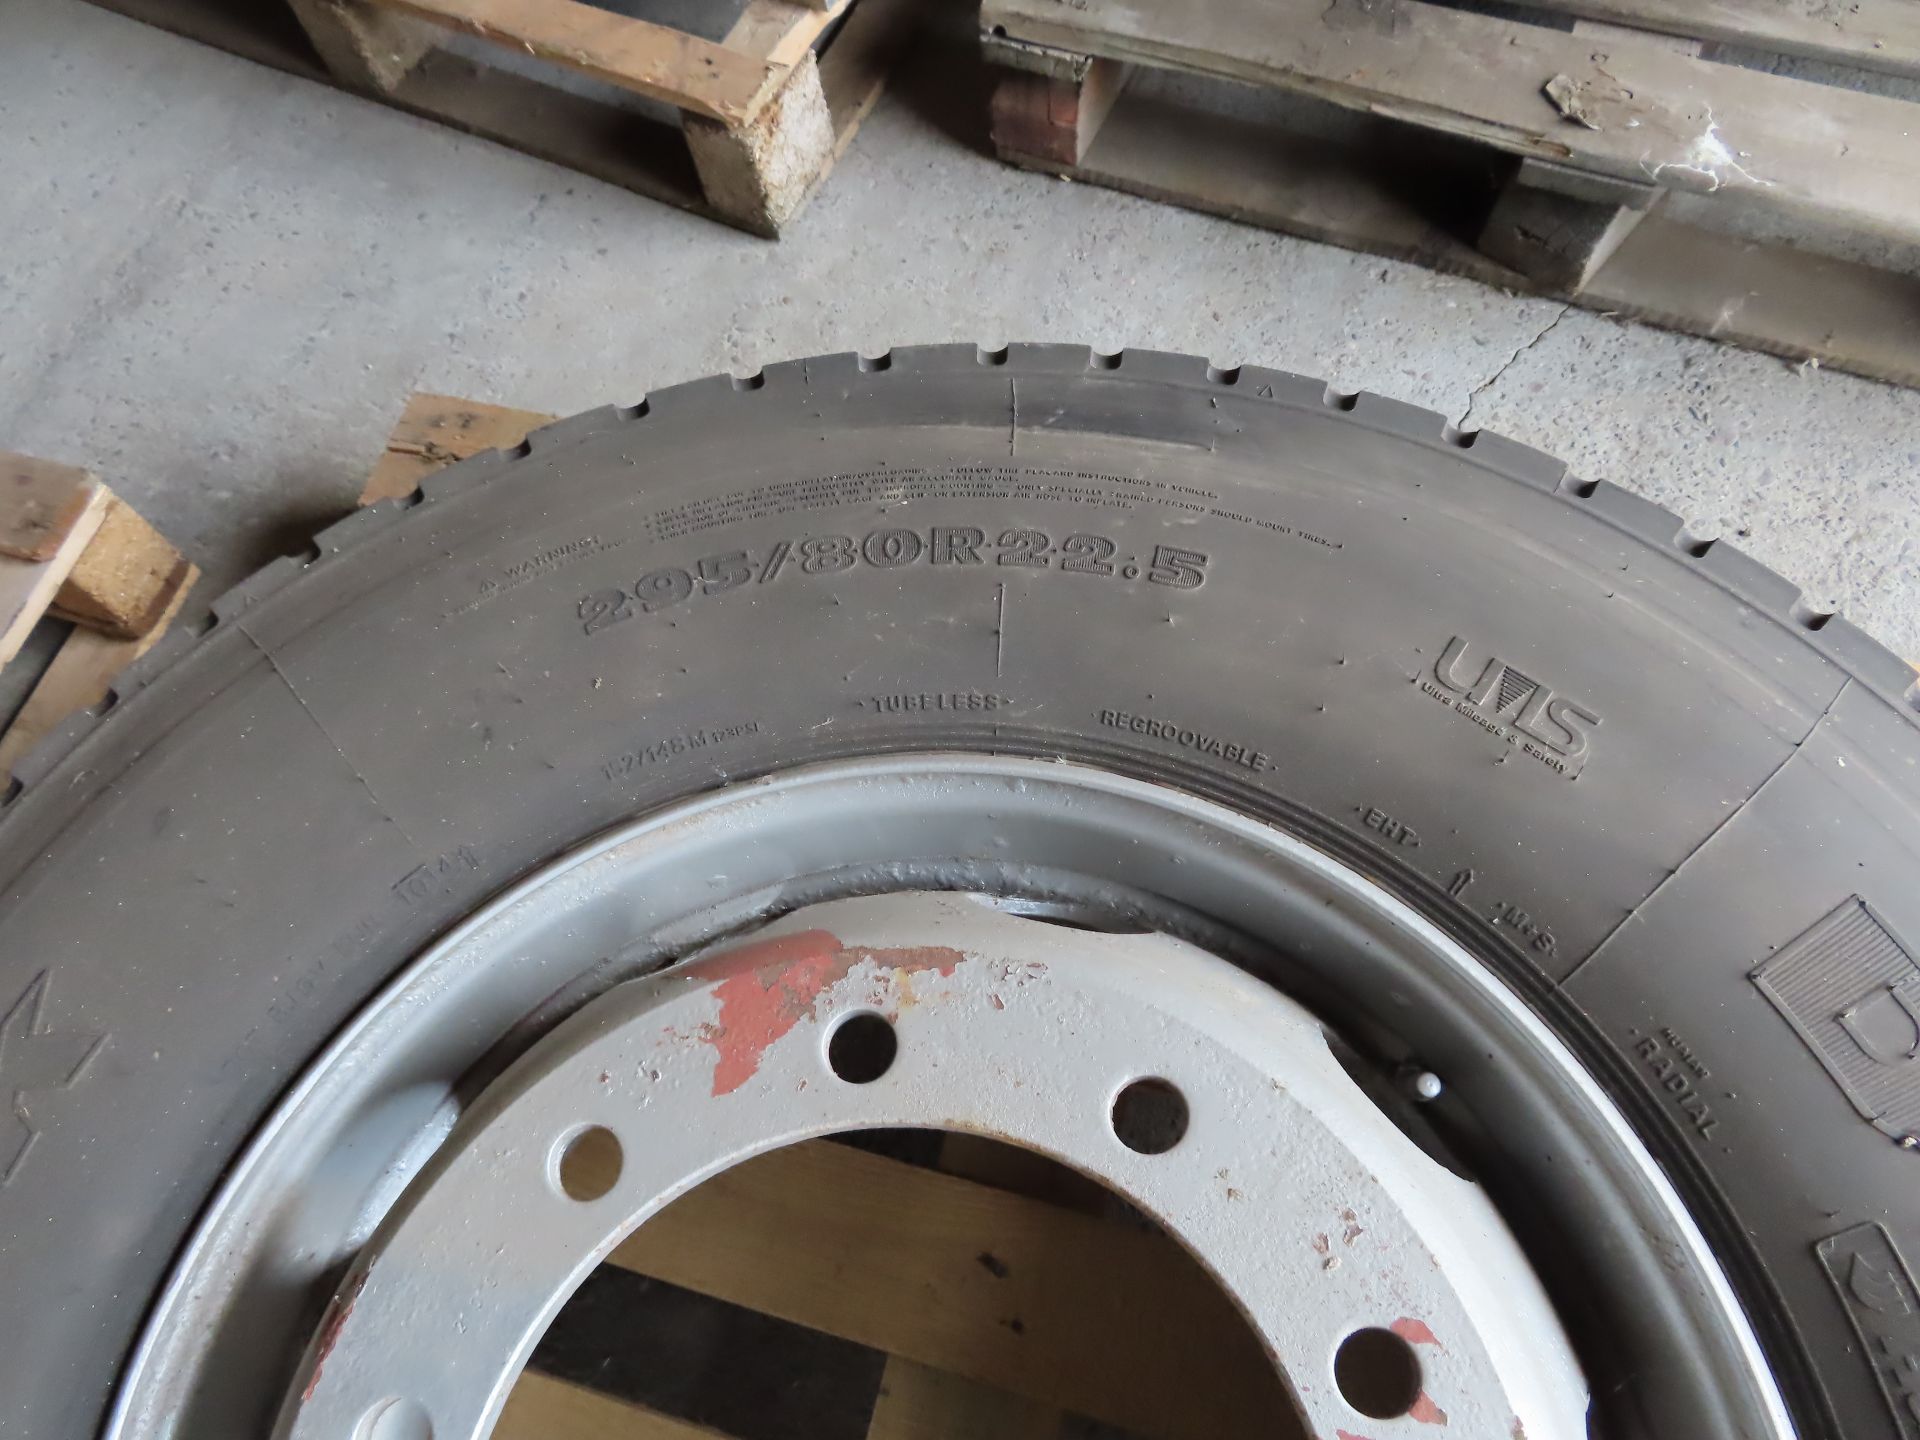 HANKOOK DH05 TYRE AND WHEEL. - Image 2 of 3